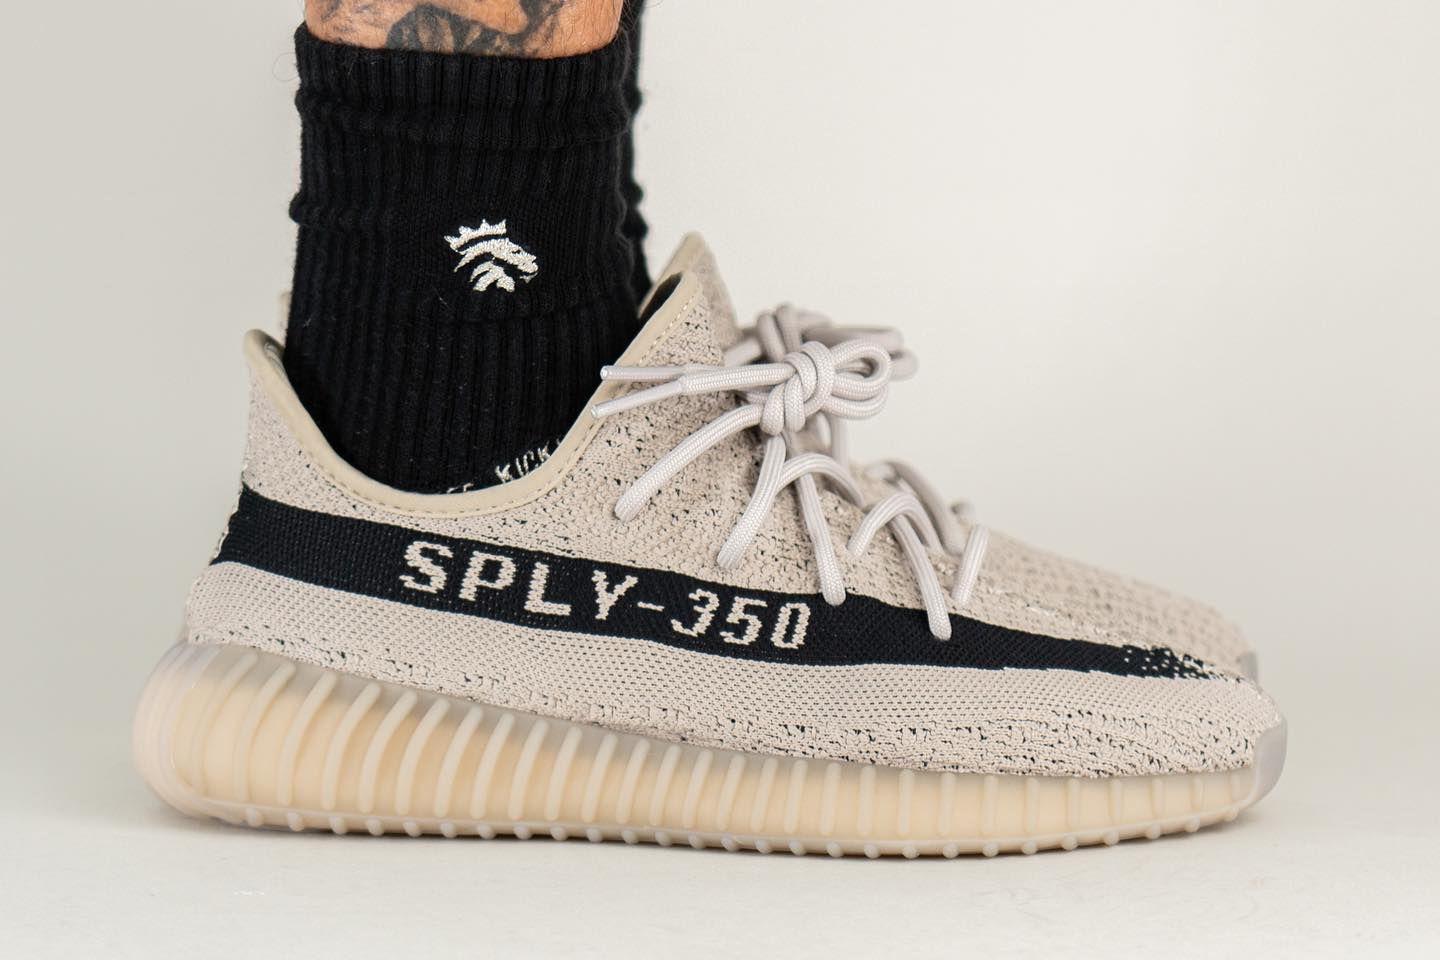 Reparation mulig Pearly Gepard On-Foot Look at the adidas Yeezy BOOST 350 V2 in Beige and Black - Sneaker  Freaker